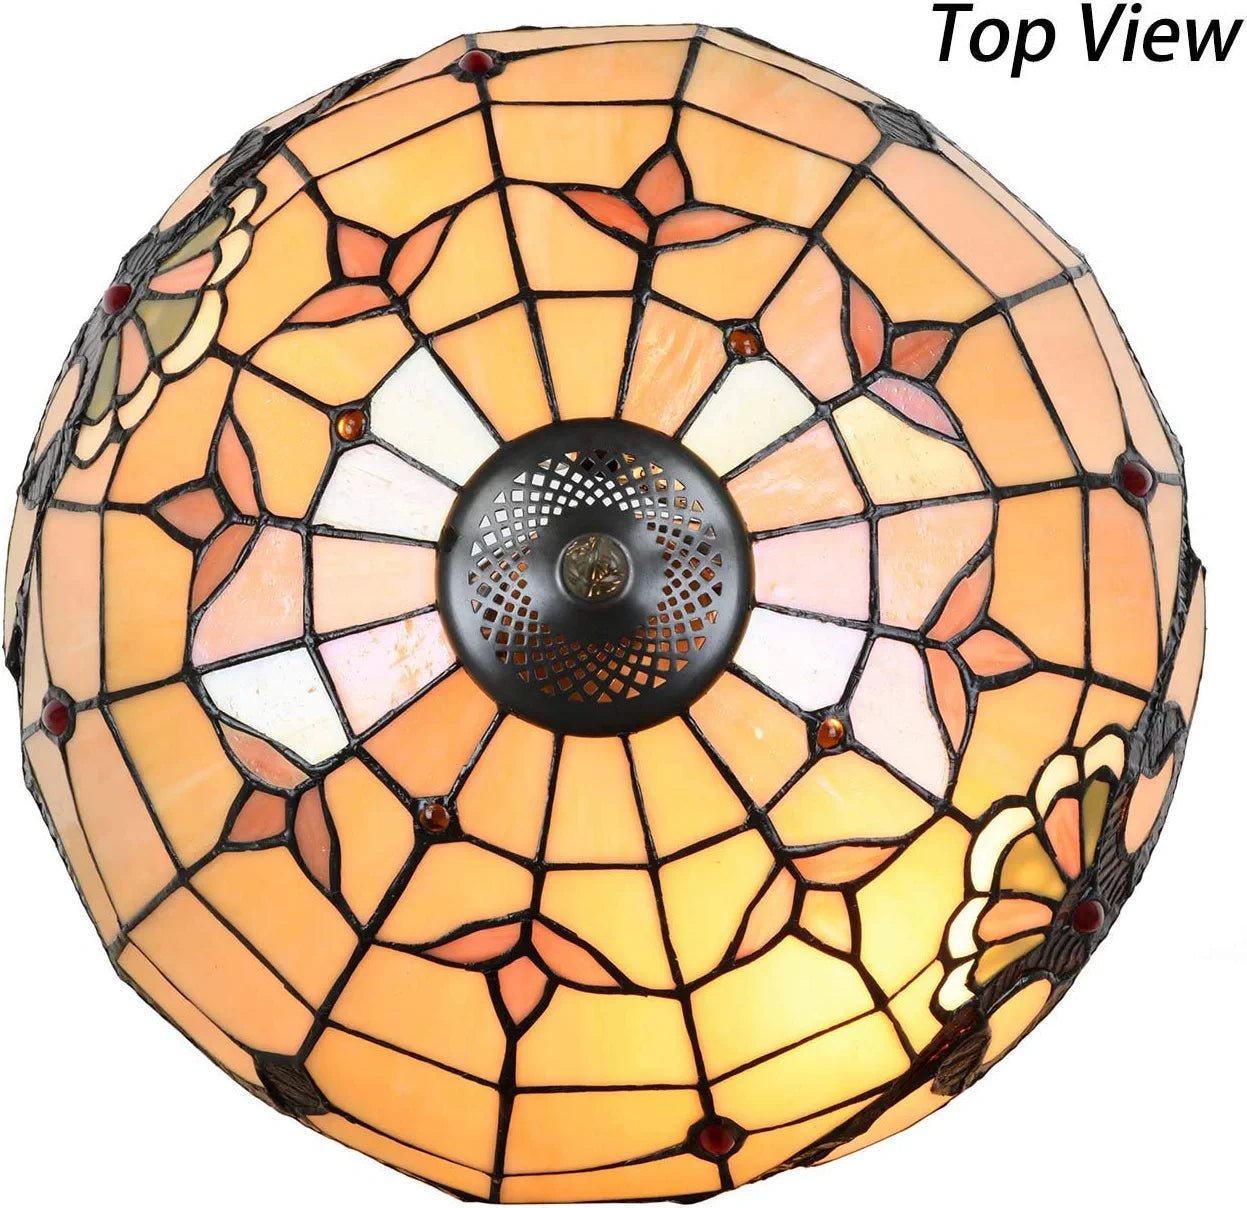 Bieye L10799 Baroque  Style Stained Glass Table Lamp, Lighted Base, 14" W x 21" H